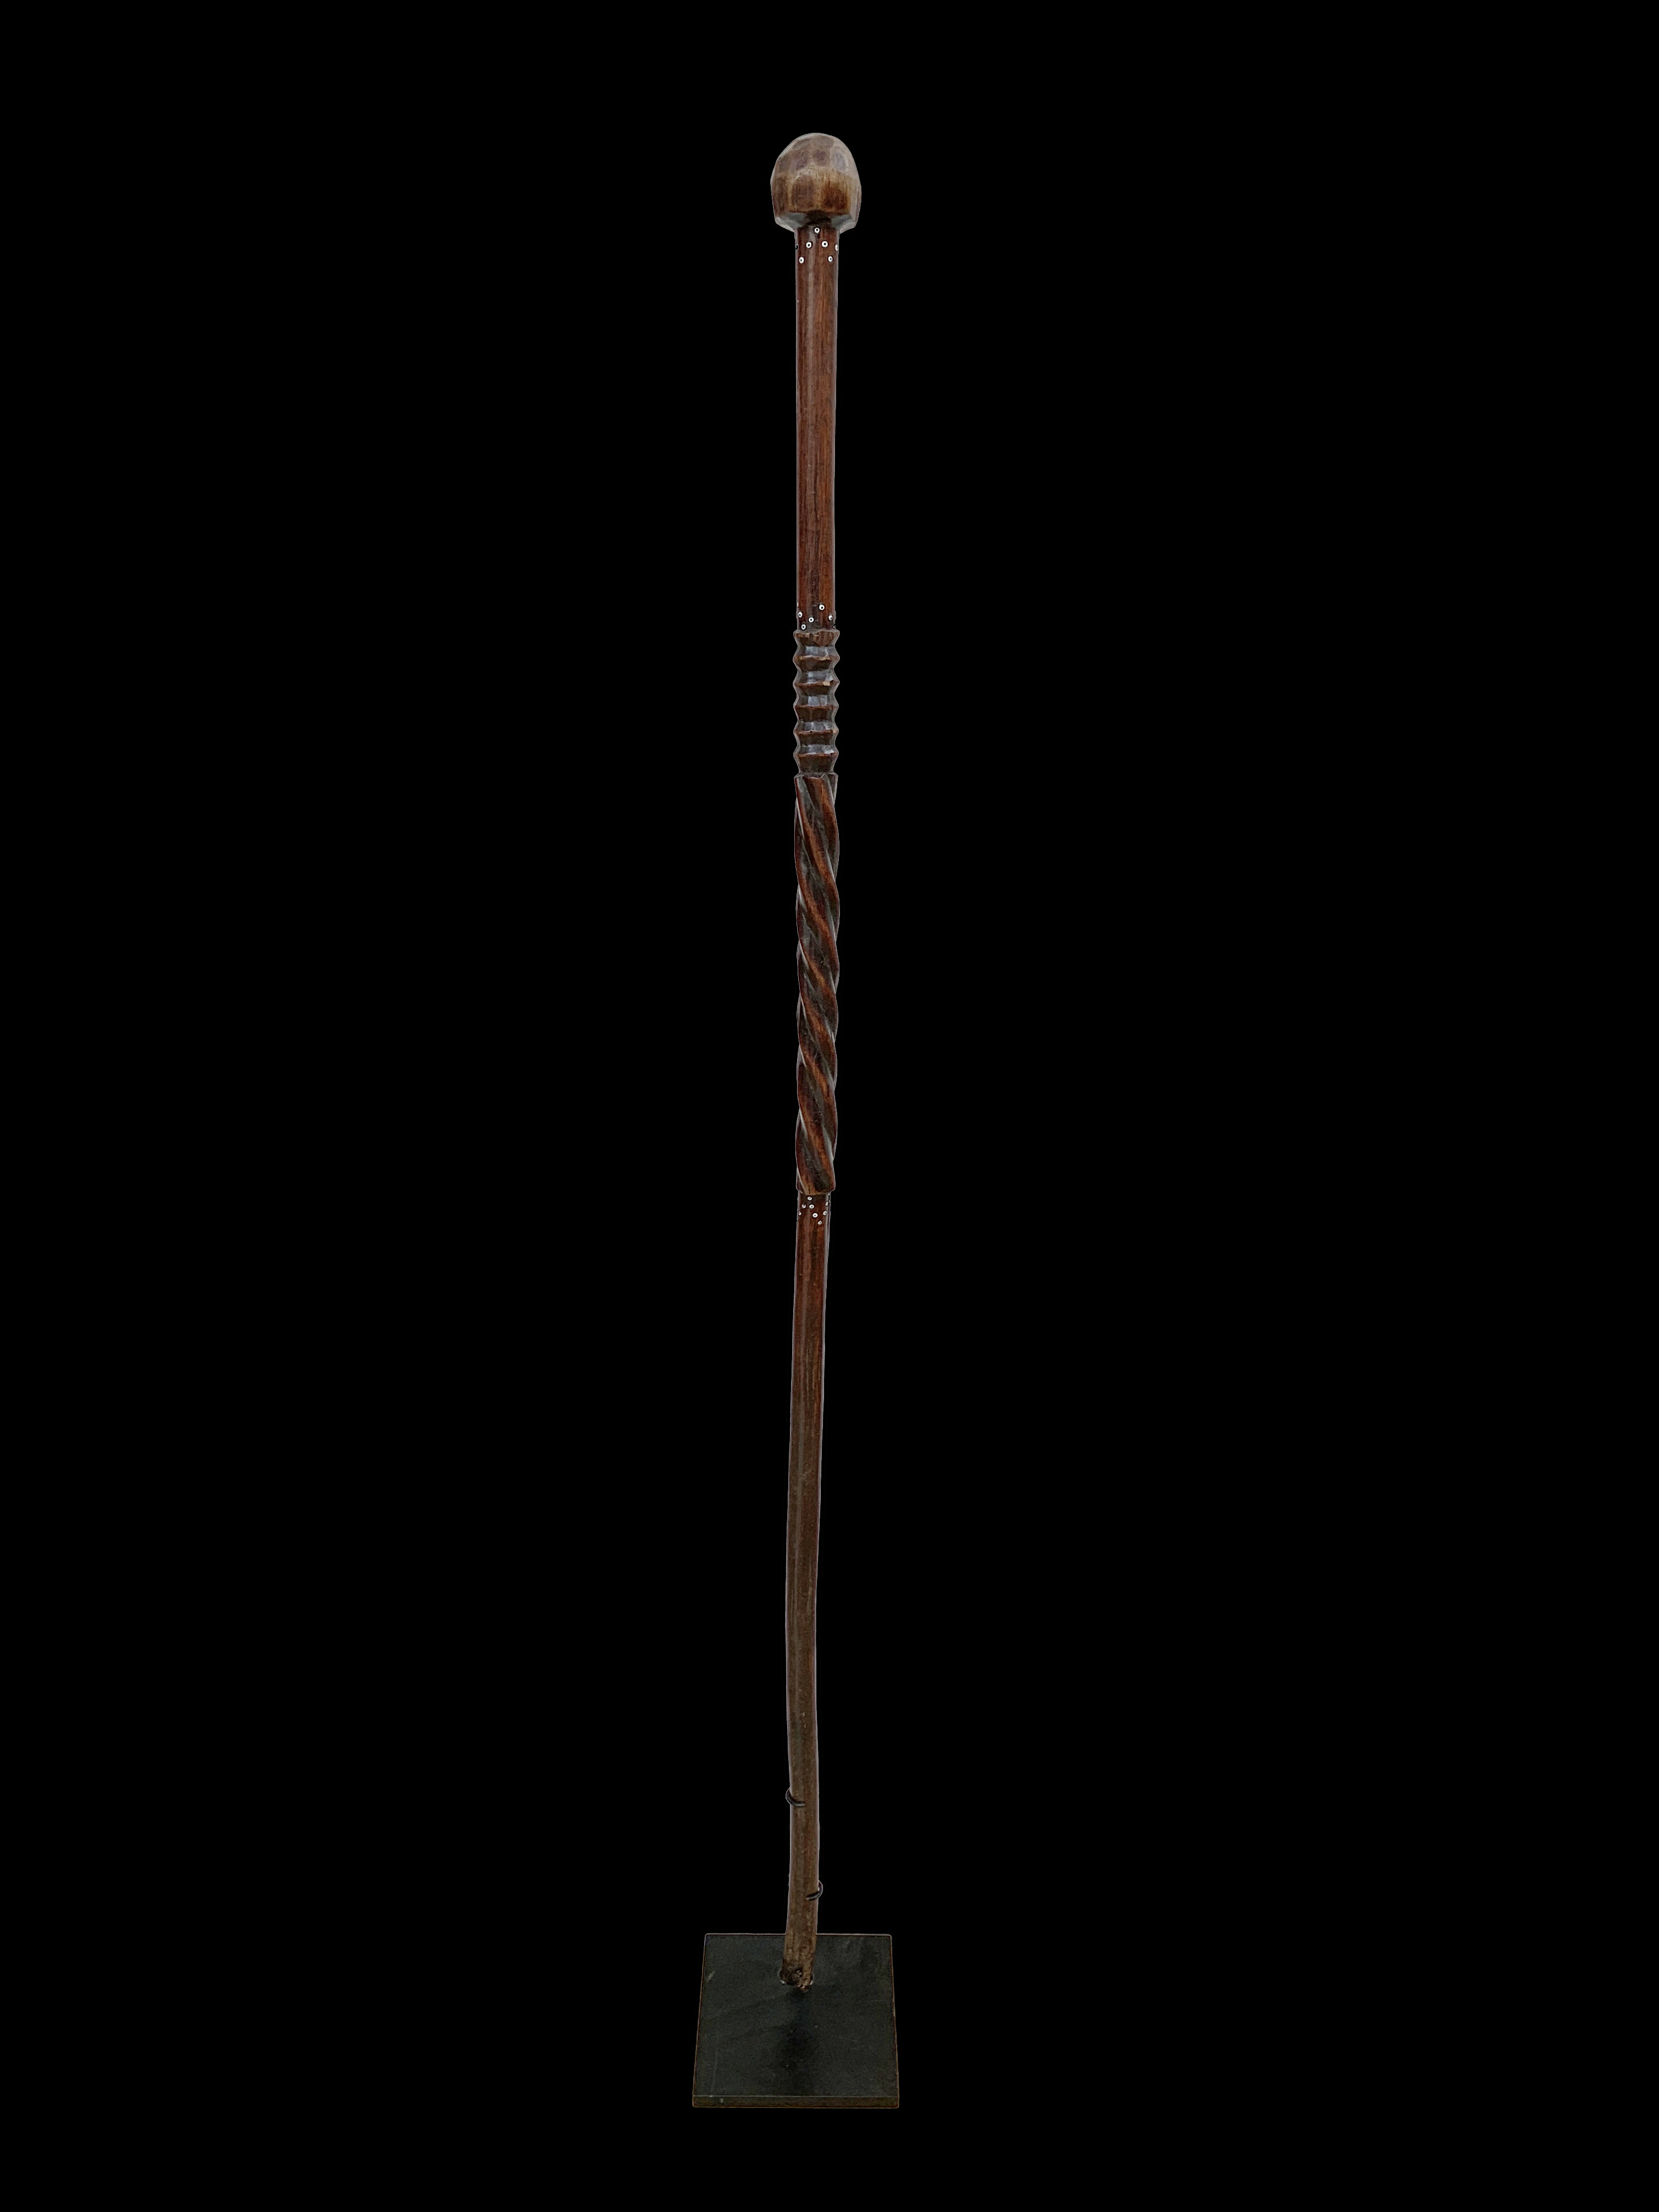 Tall Knobkerrie Club with inlaid beads (5)- Zulu People, South Africa